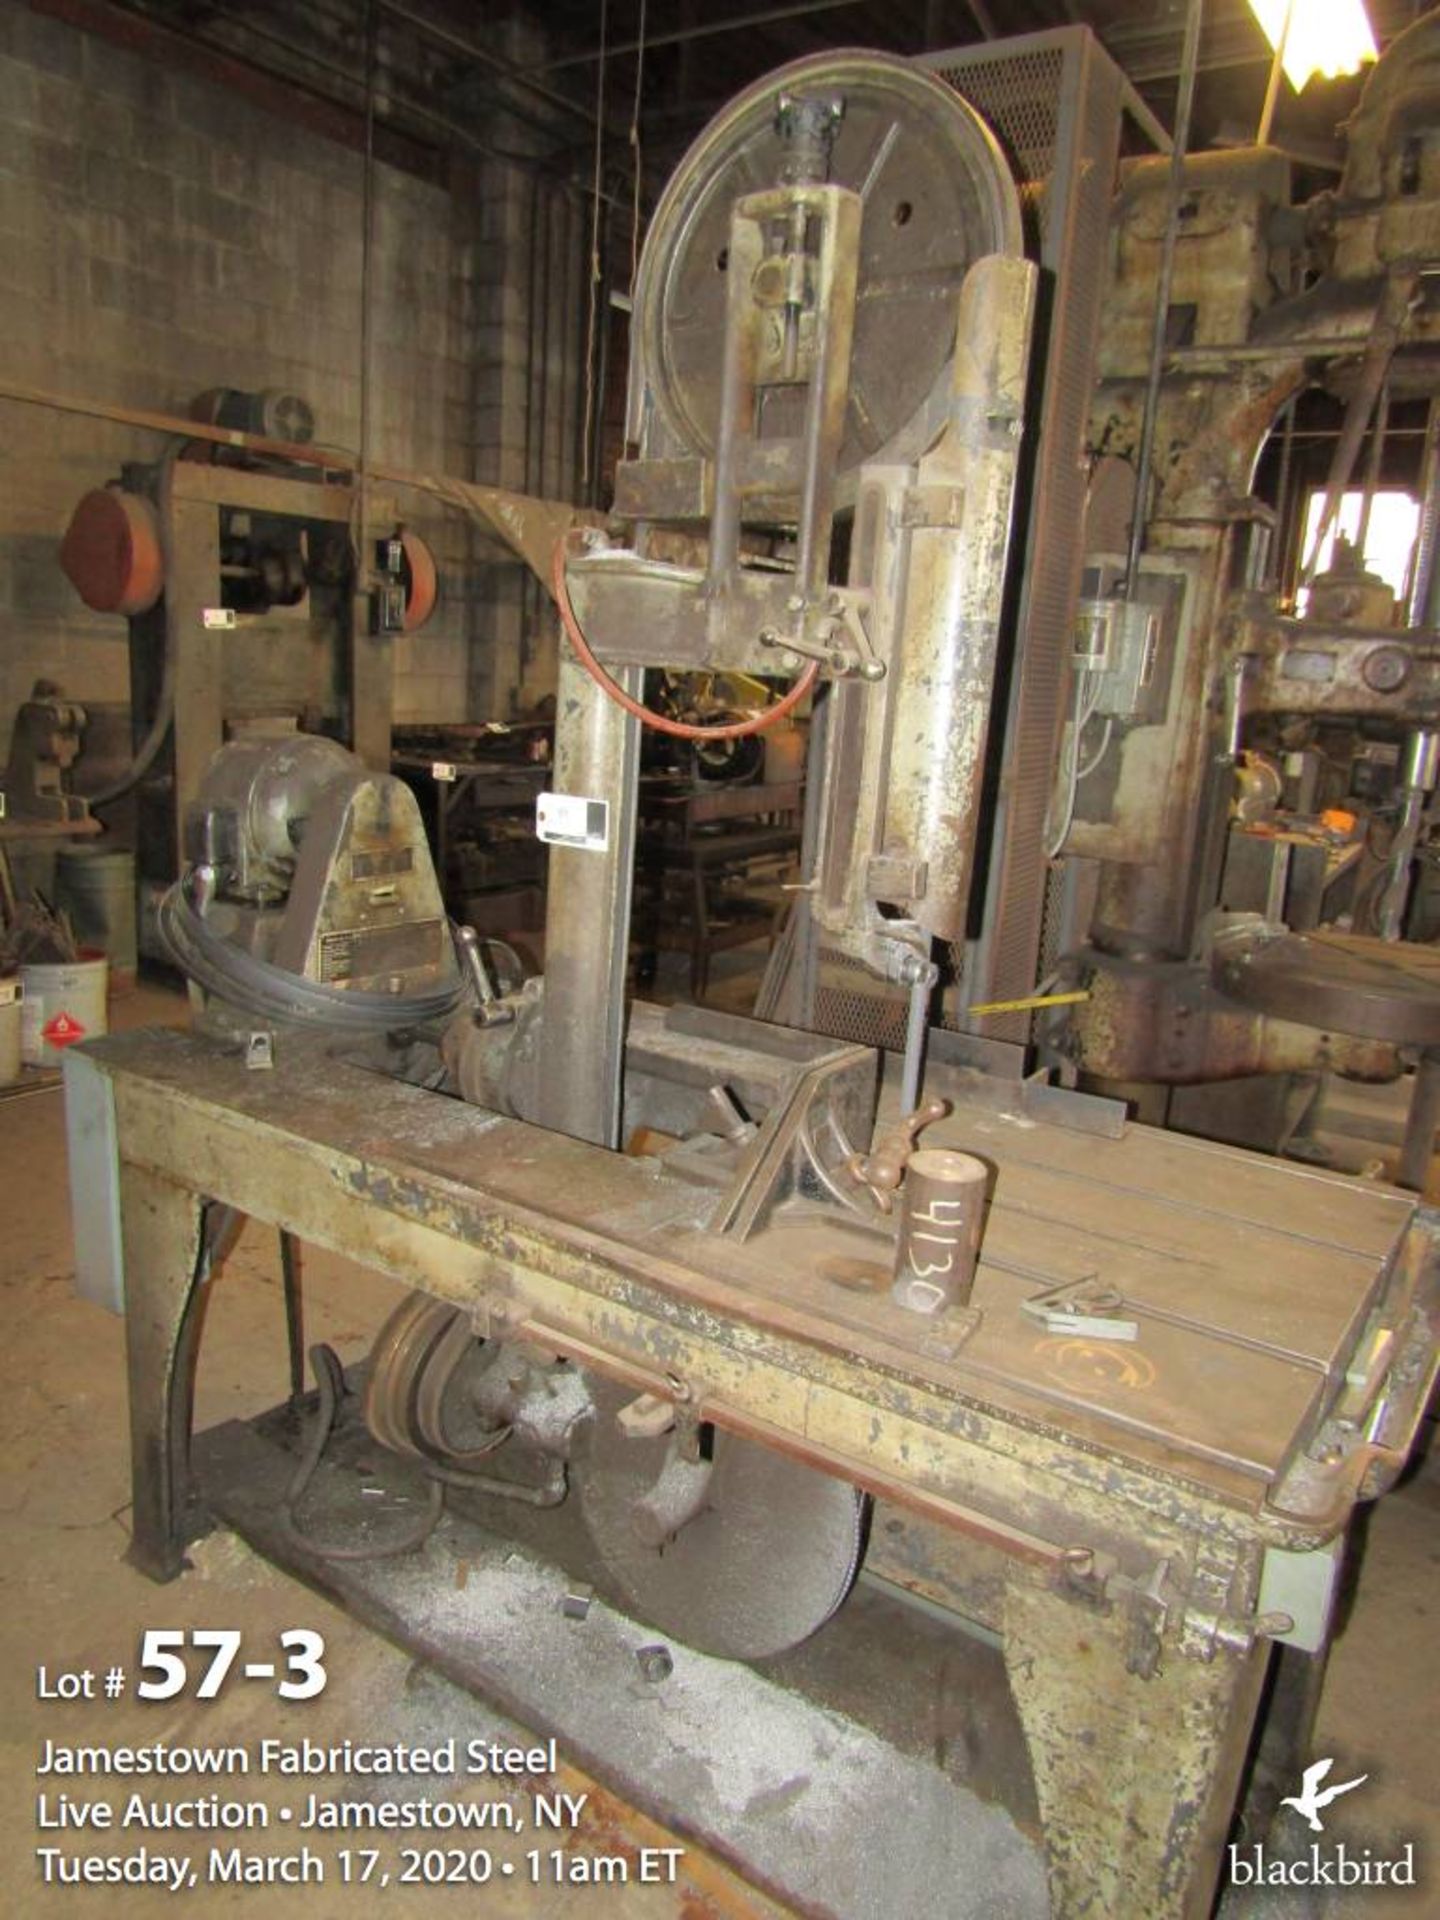 Marvel belt driven band saw 6 speed approx. 20" cut, 1hp. 3ph. - Image 4 of 5